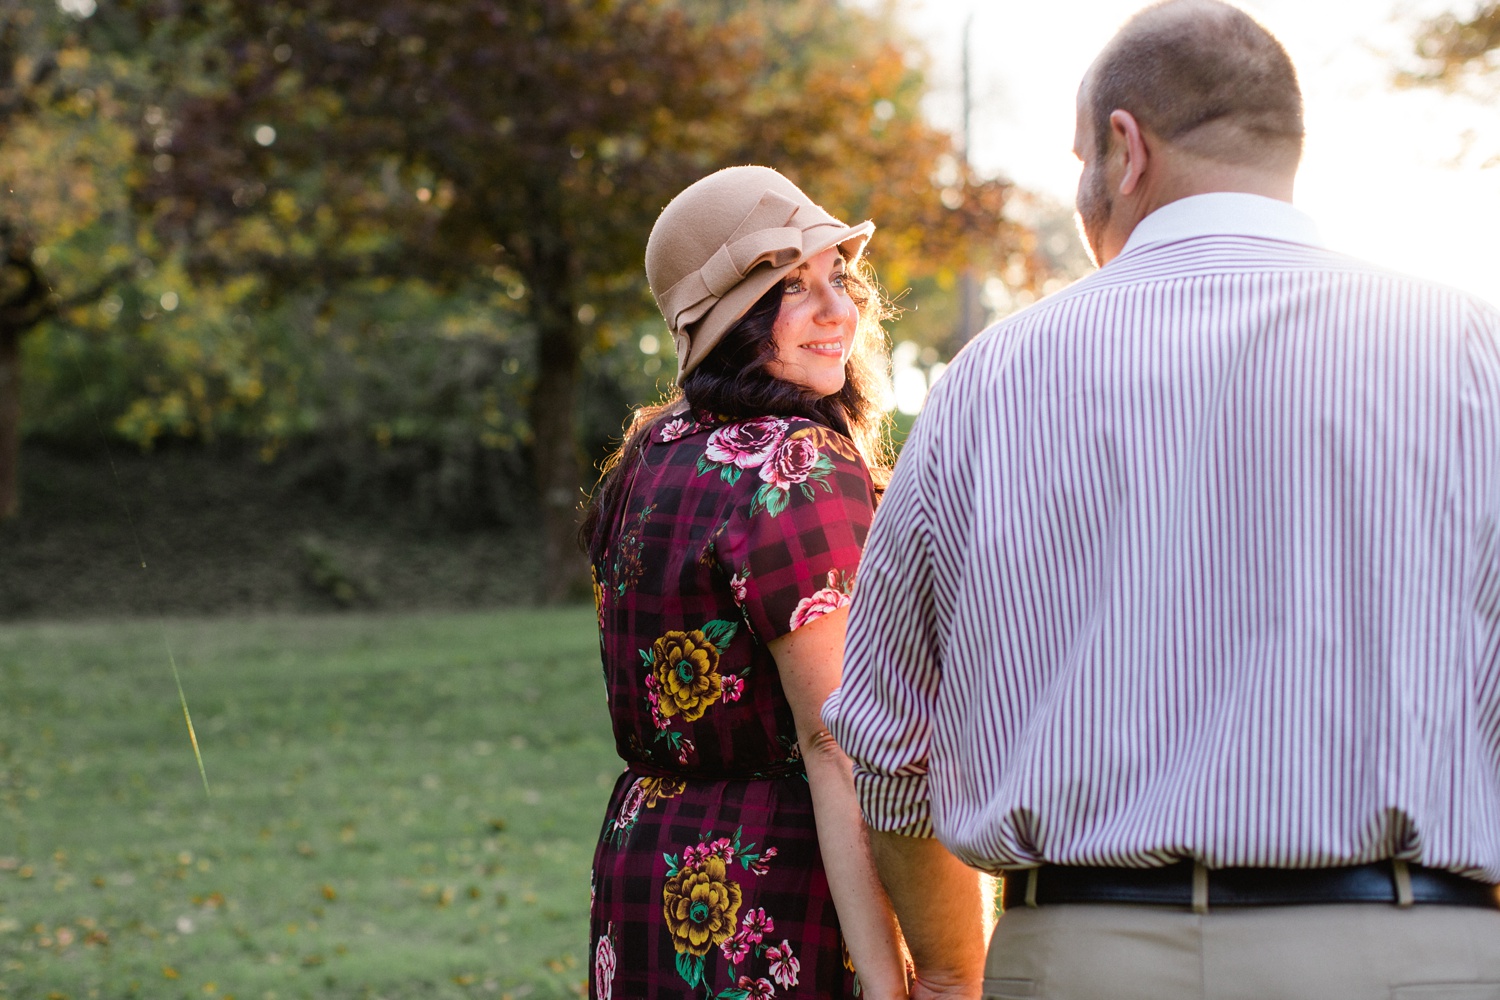 Moscow PA Fall Engagement Session_0022.jpg